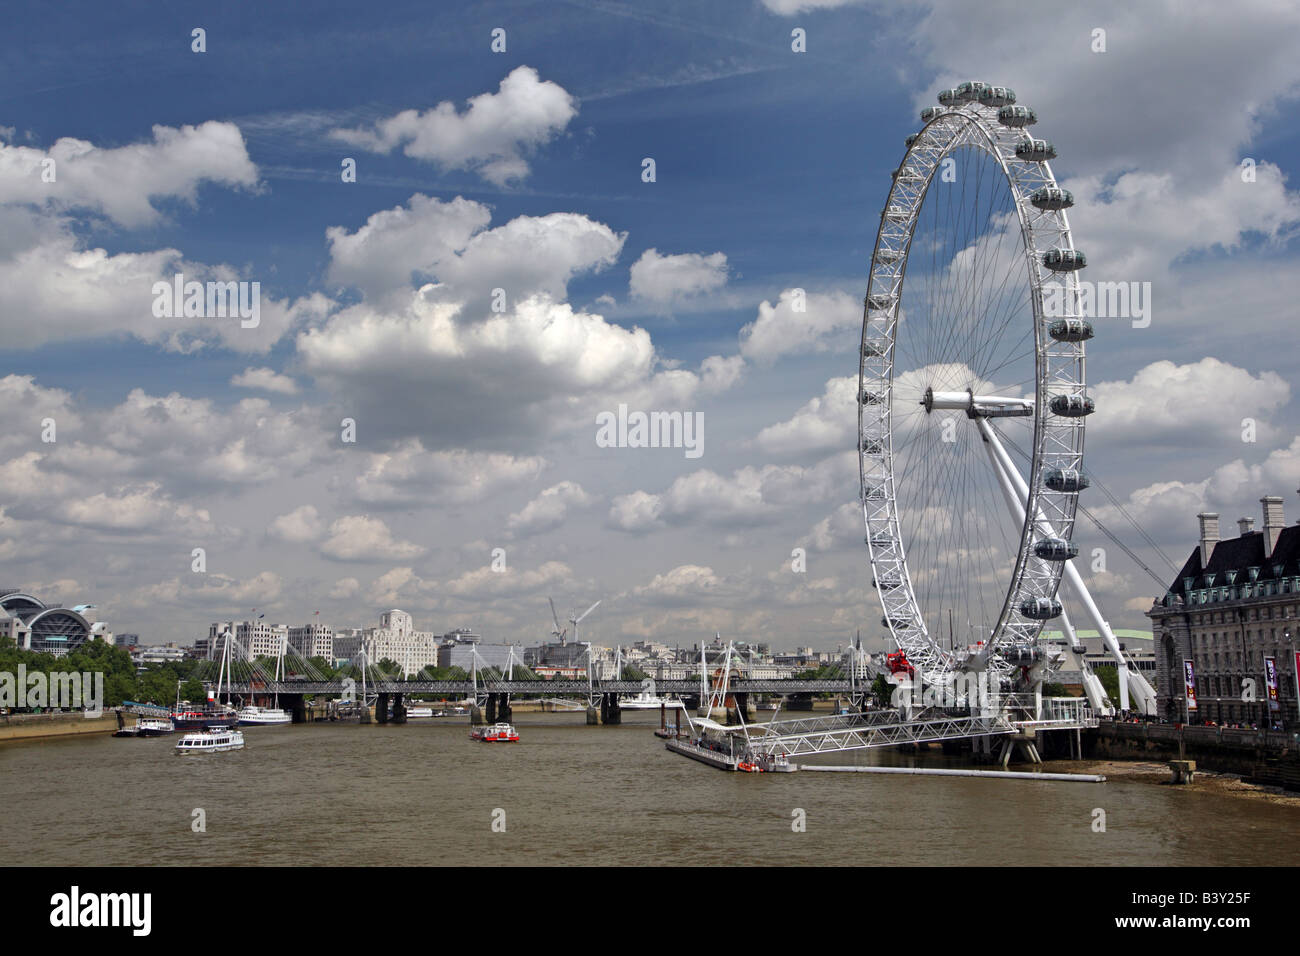 The River Thames and the London Eye Ferris Wheel, London, England Stock Photo